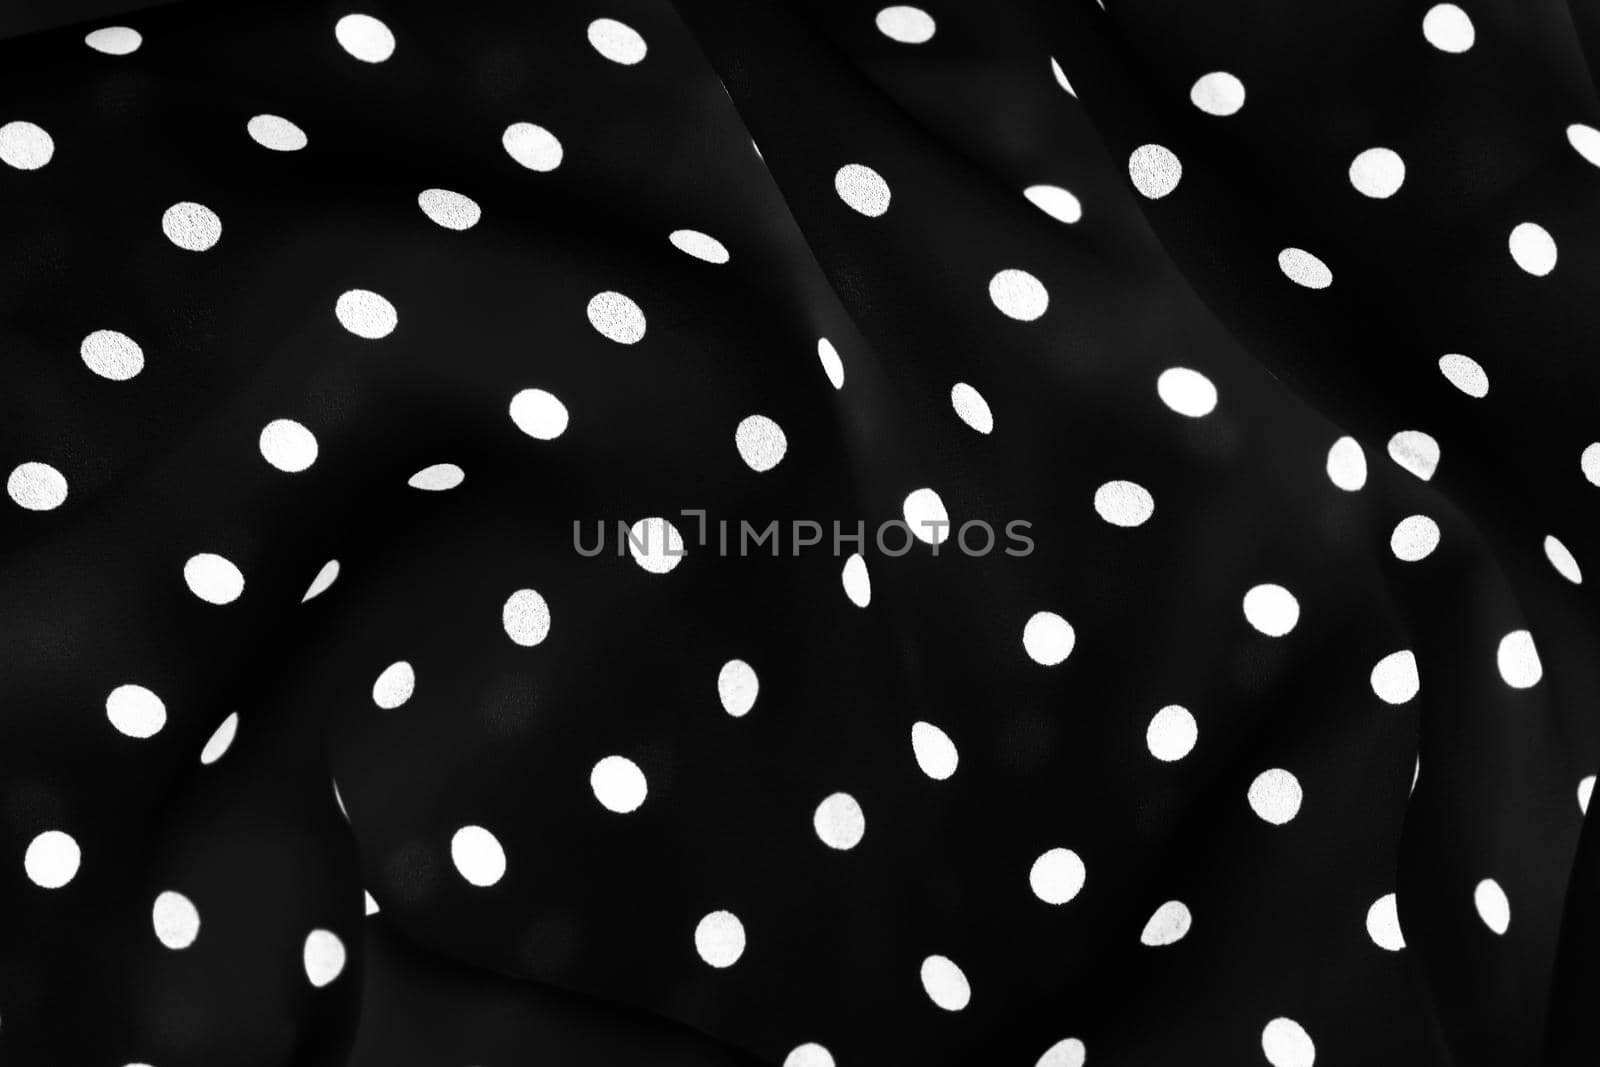 Fashion design, interior decor and classic material concept - Vintage polka dot textile background texture, white dots on black luxury fabric design pattern